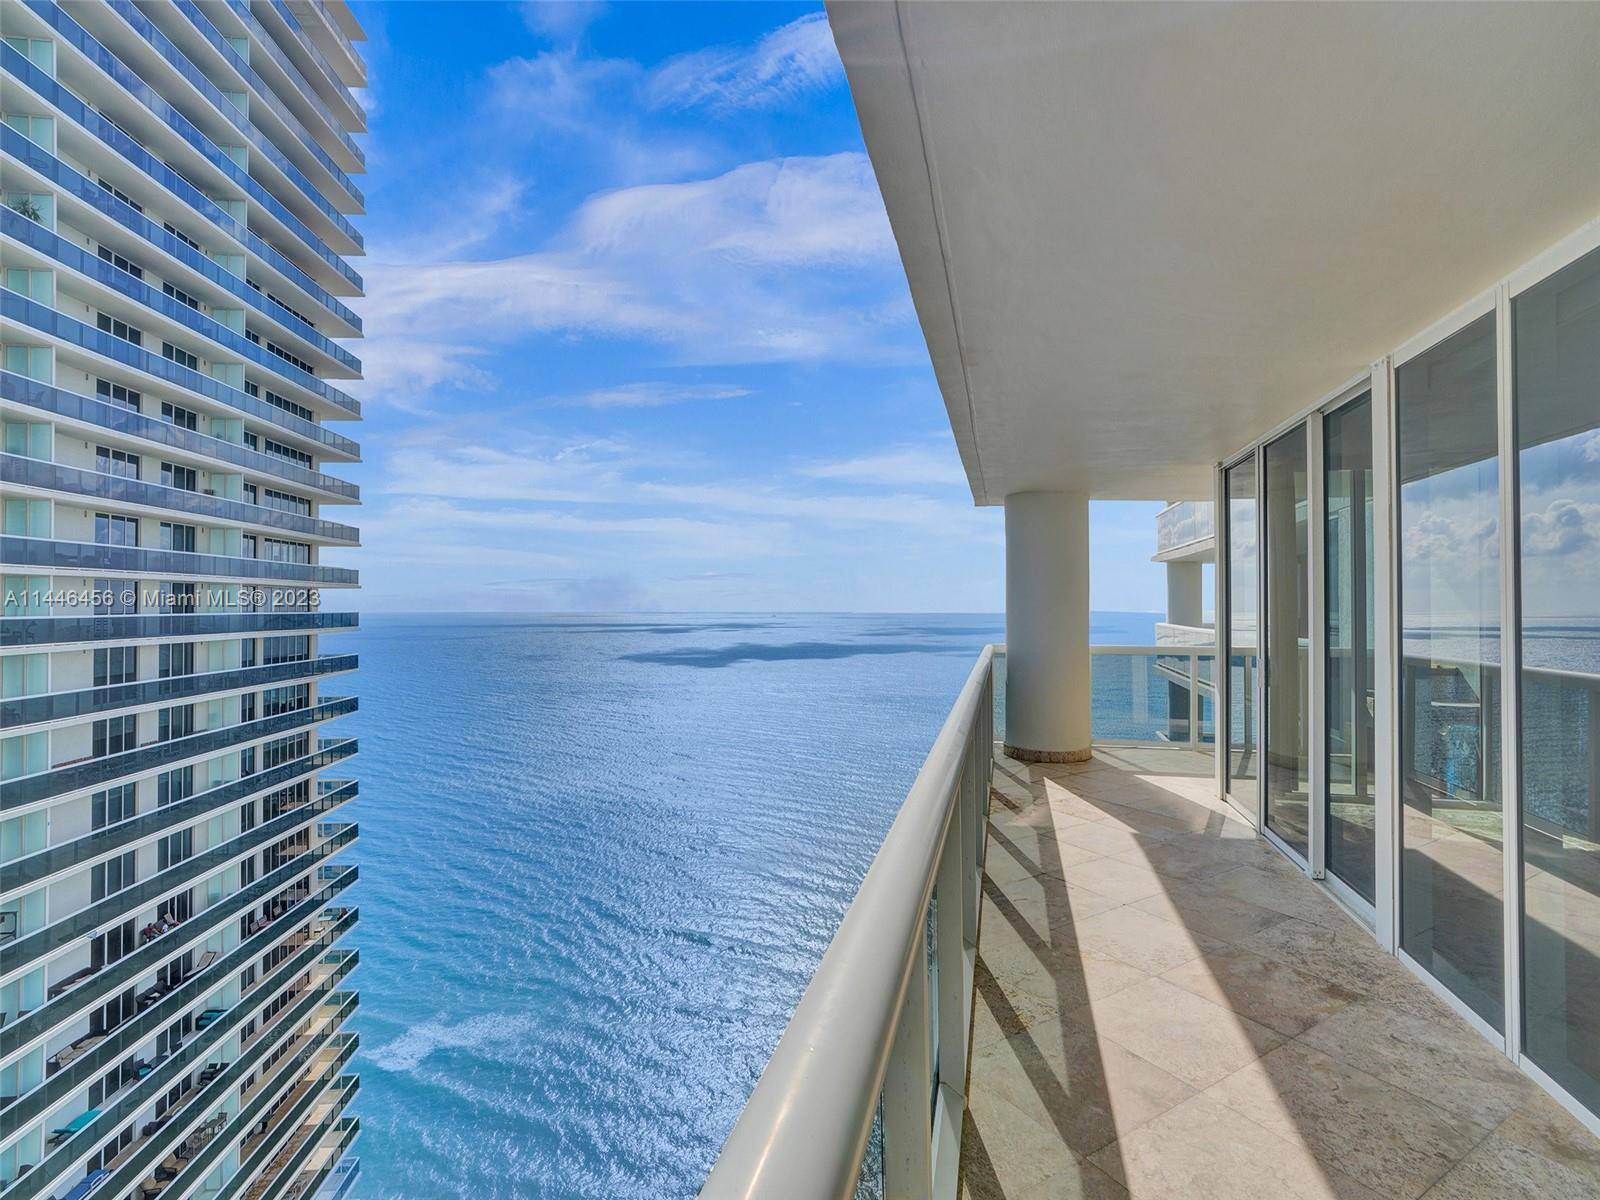 Expansive 2 bed 2 bath corner unit on the 39th floor of the renowned Beach Club.